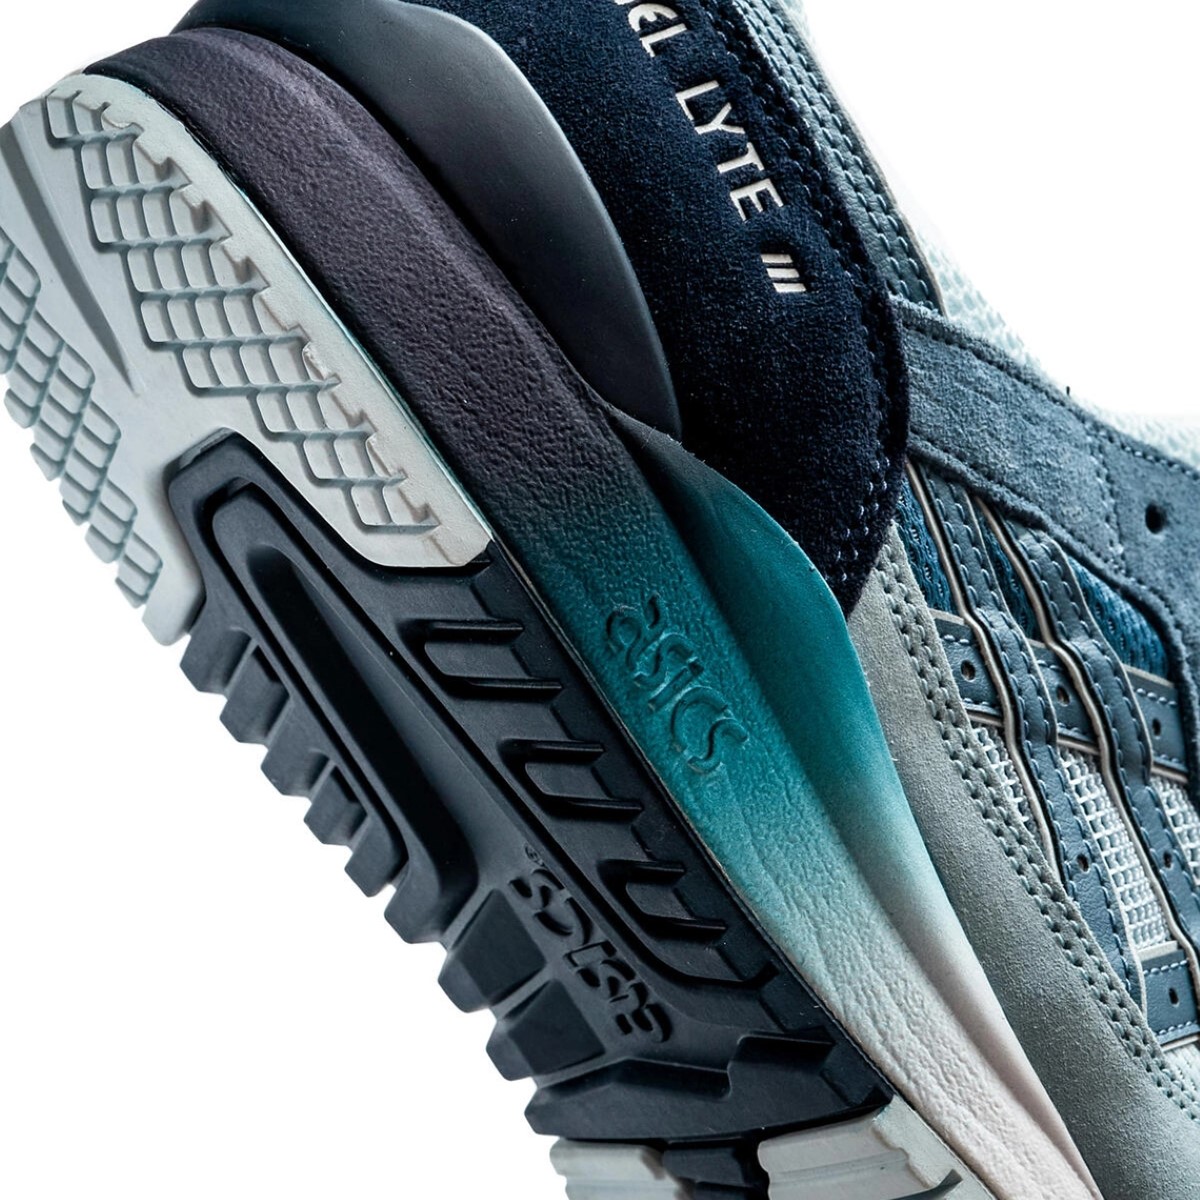 The Asics Gel-Lyte III welcomes "Arctic Sky" and "Simply Taupe" to its Summer collection